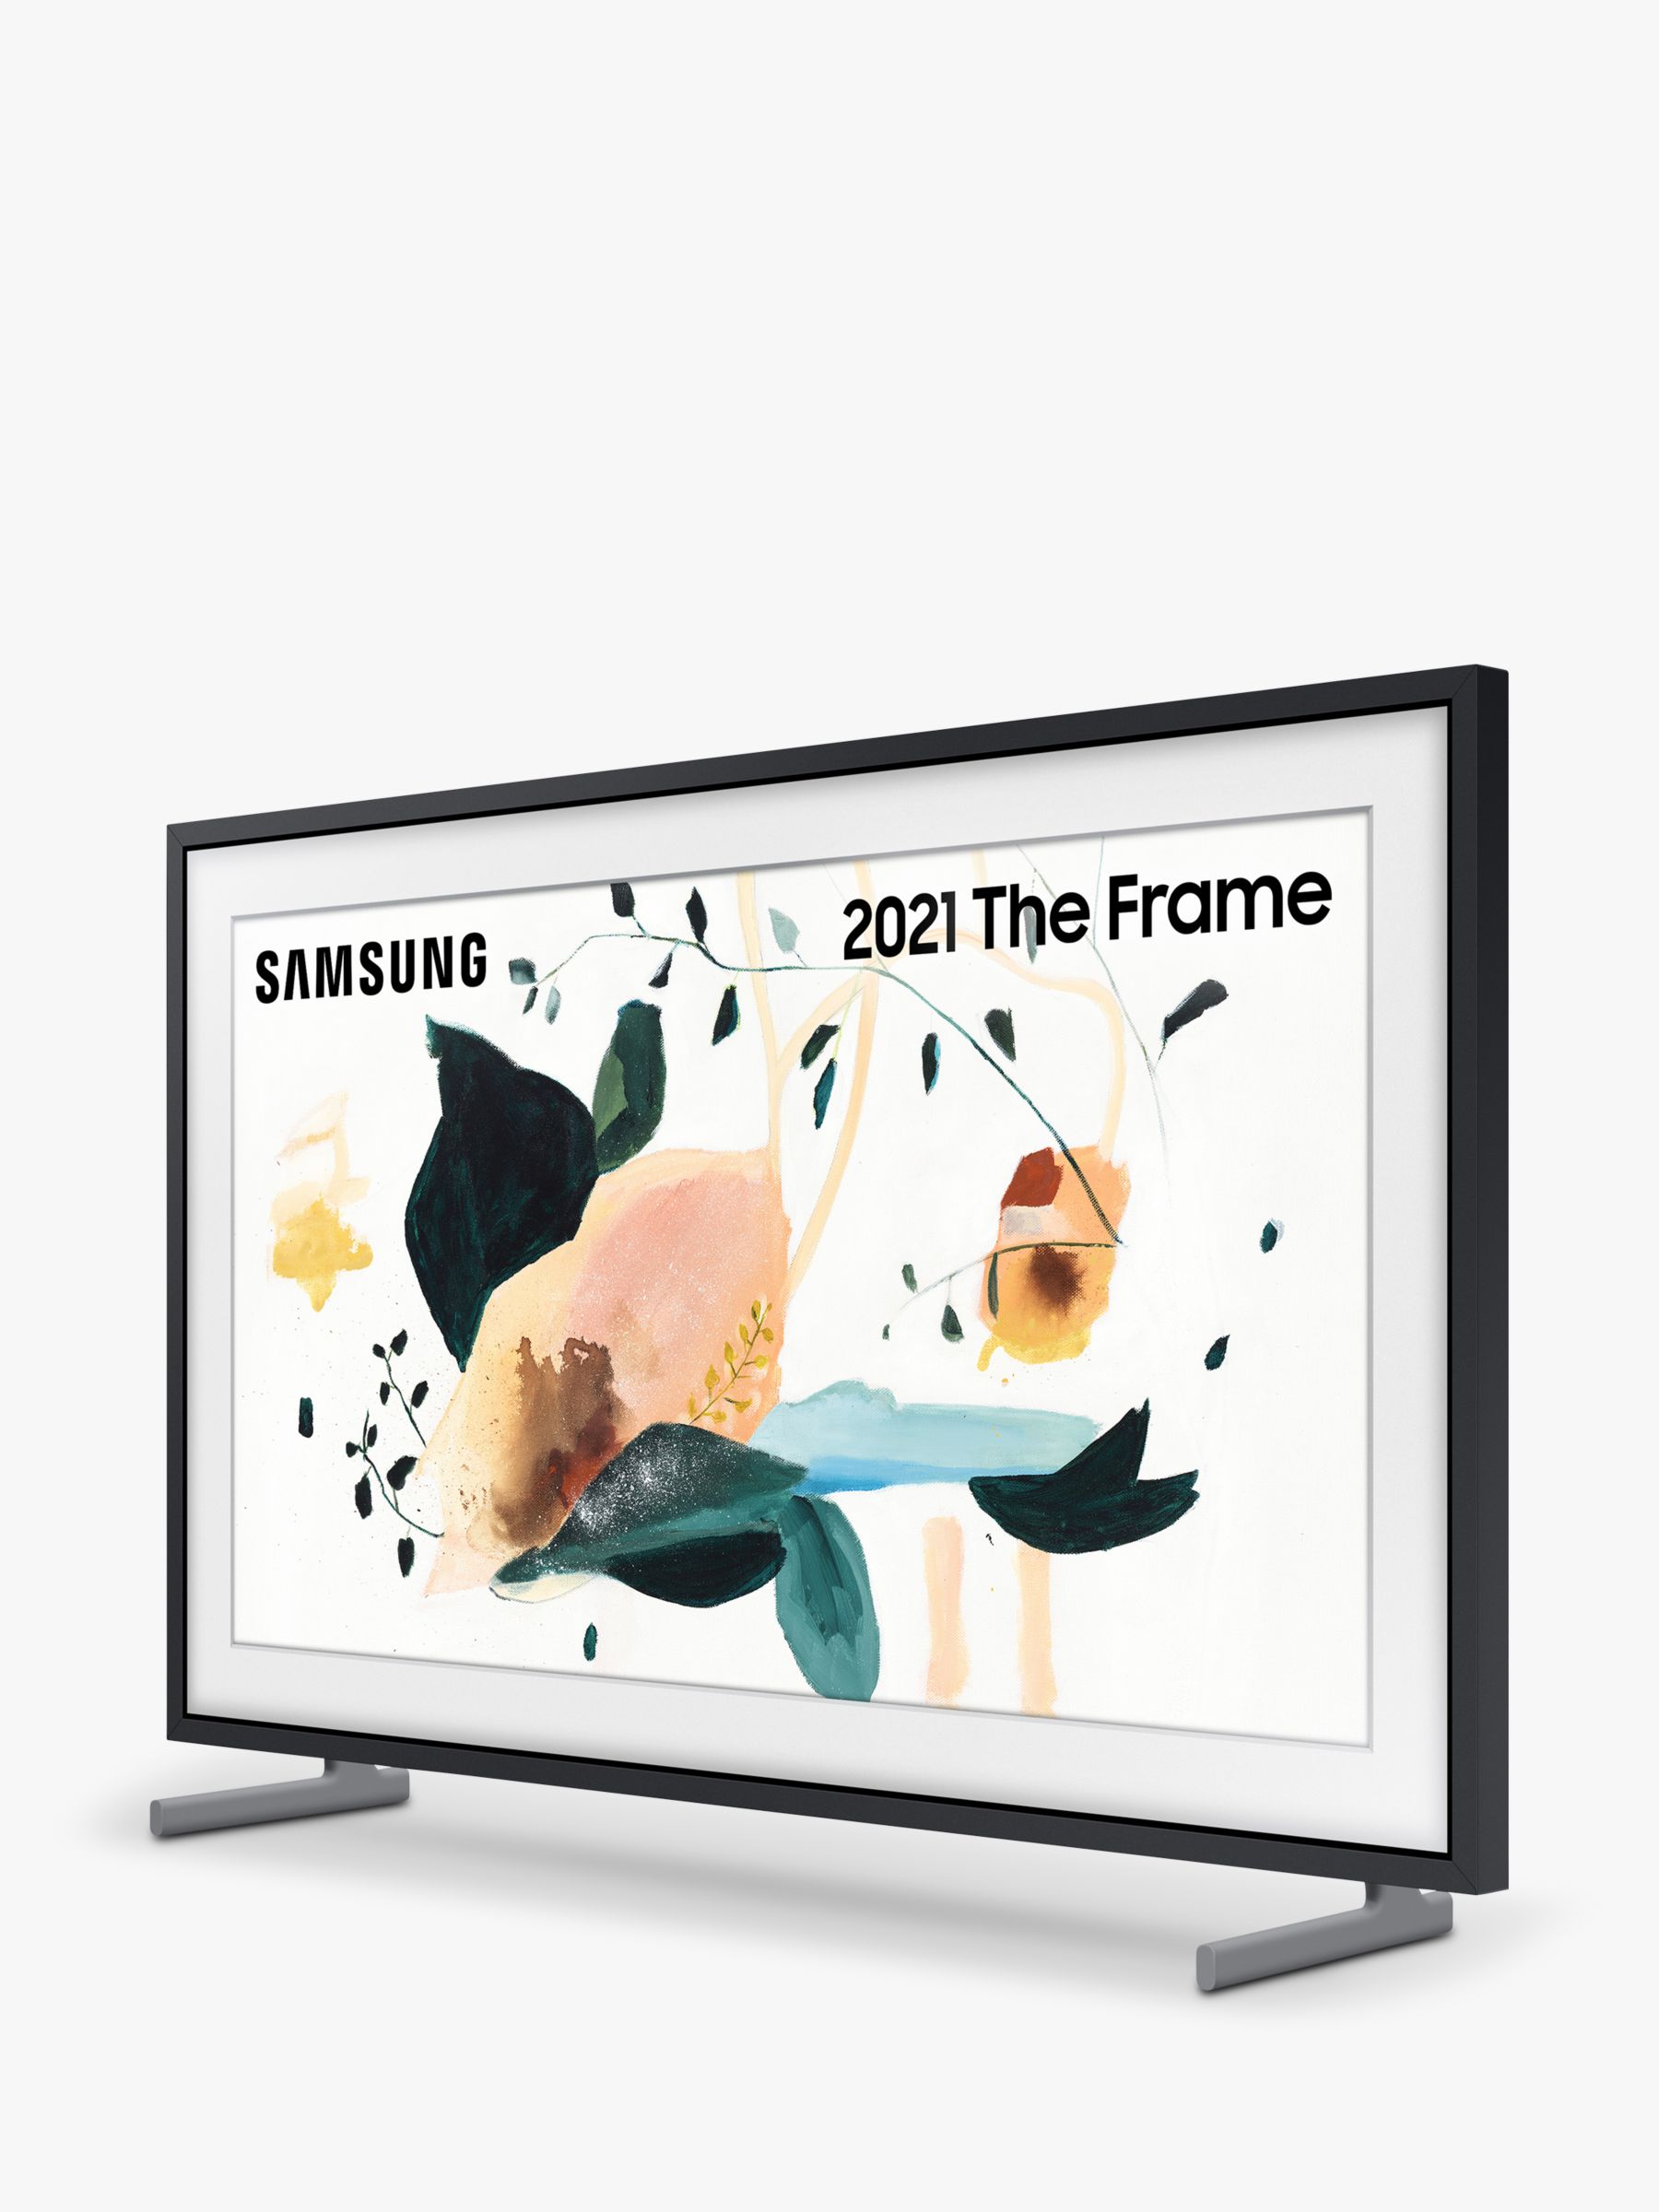 Samsung The Frame 21 Qled Art Mode Tv With Slim Fit Wall Mount 55 Inch